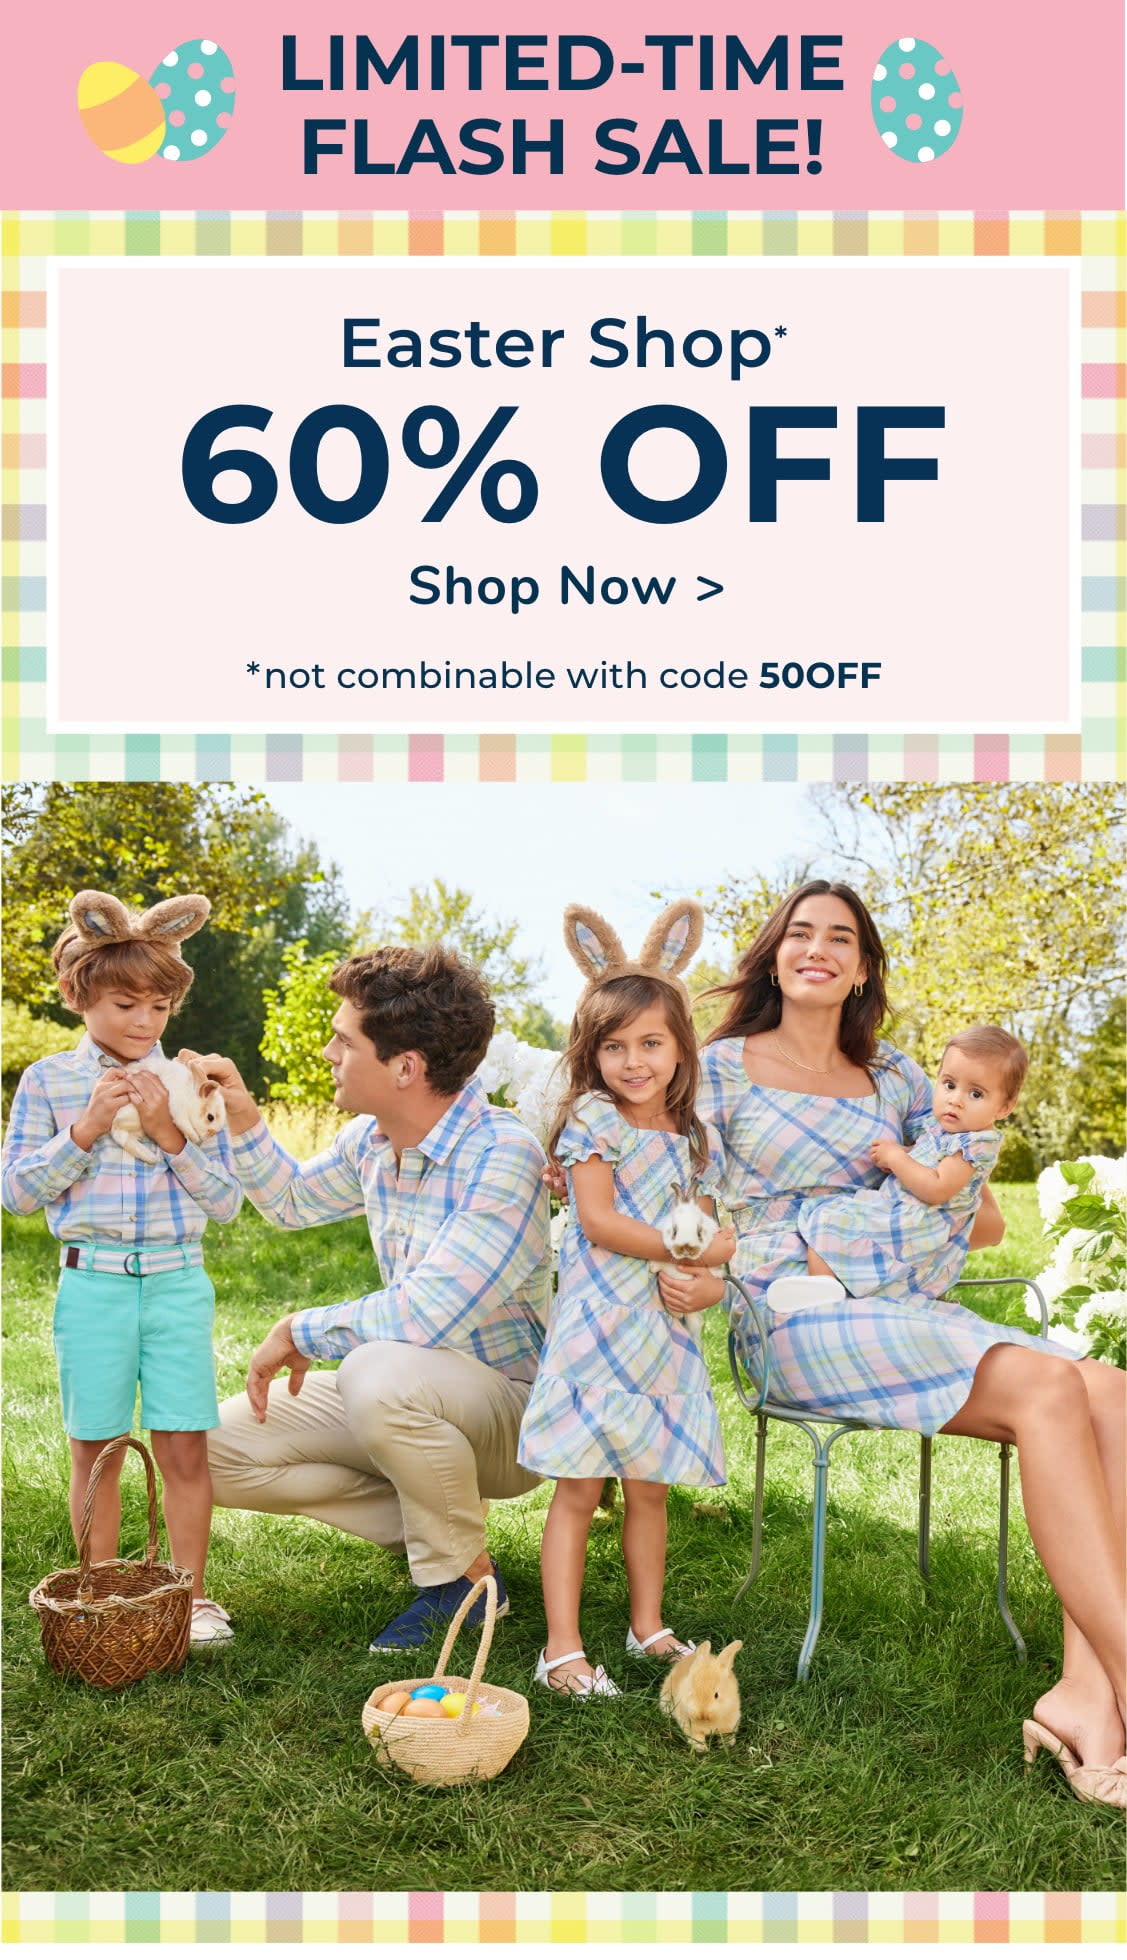 LIMITED-TIME FLASH SALE! Easter Shop 60% OFF *not combinable with code 50OFF